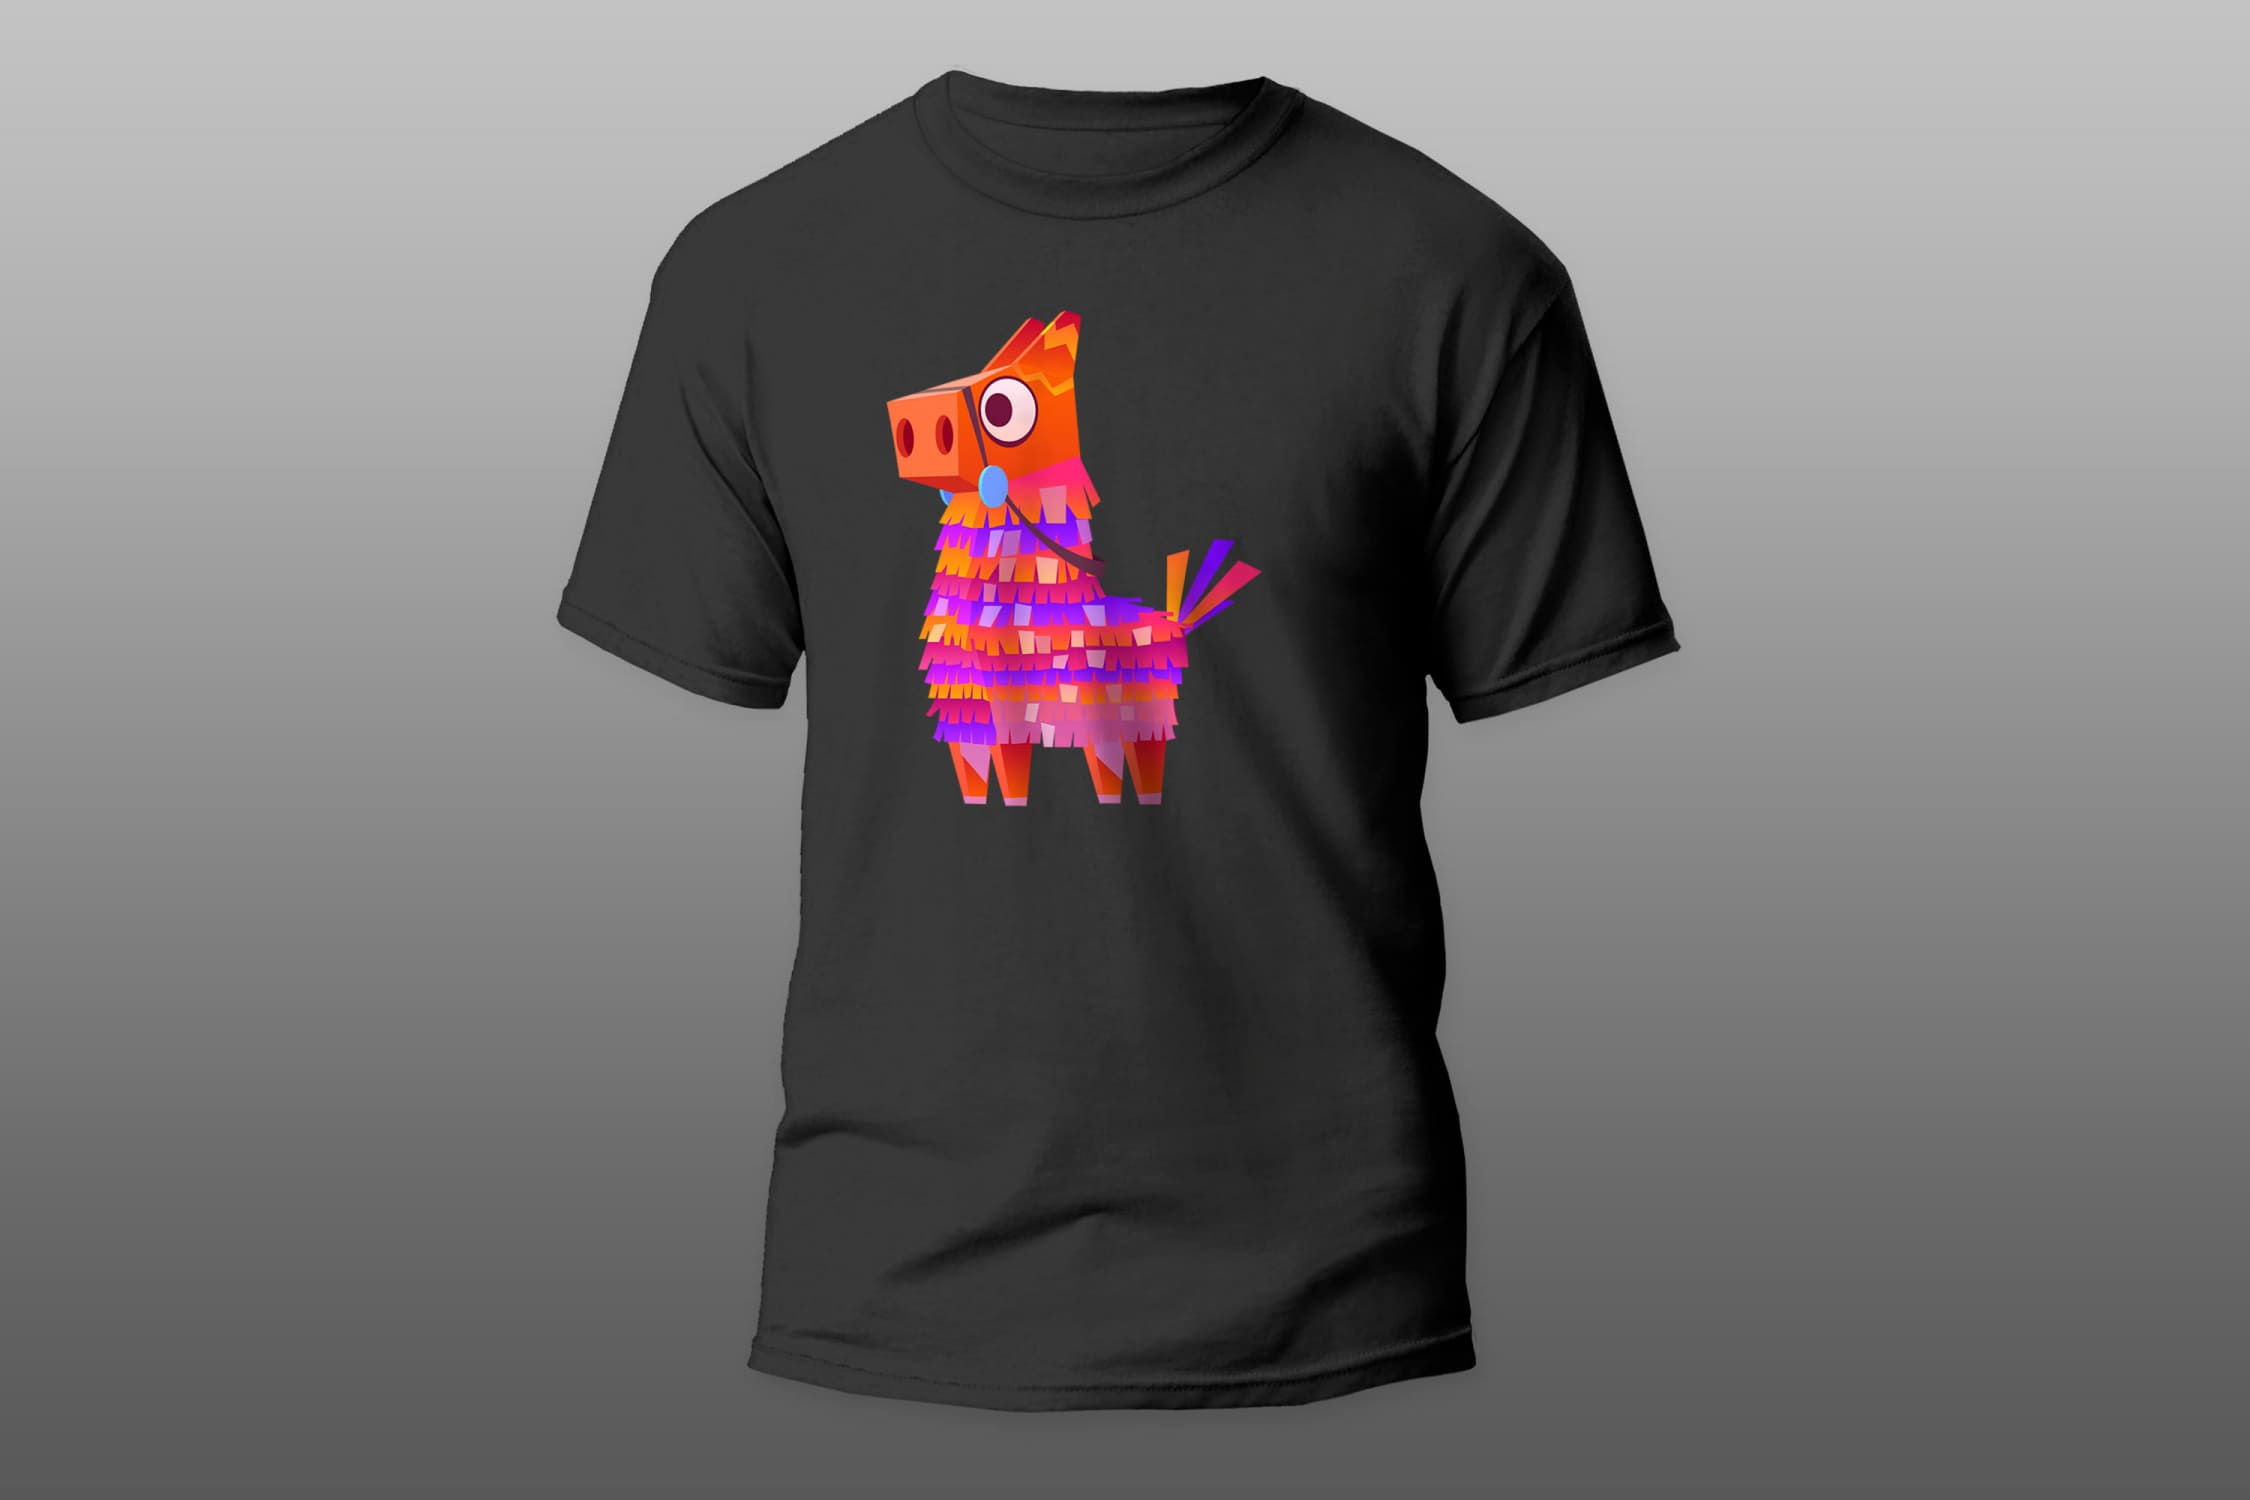 Black t-shirt with a red tones llama on a gray gradient background.